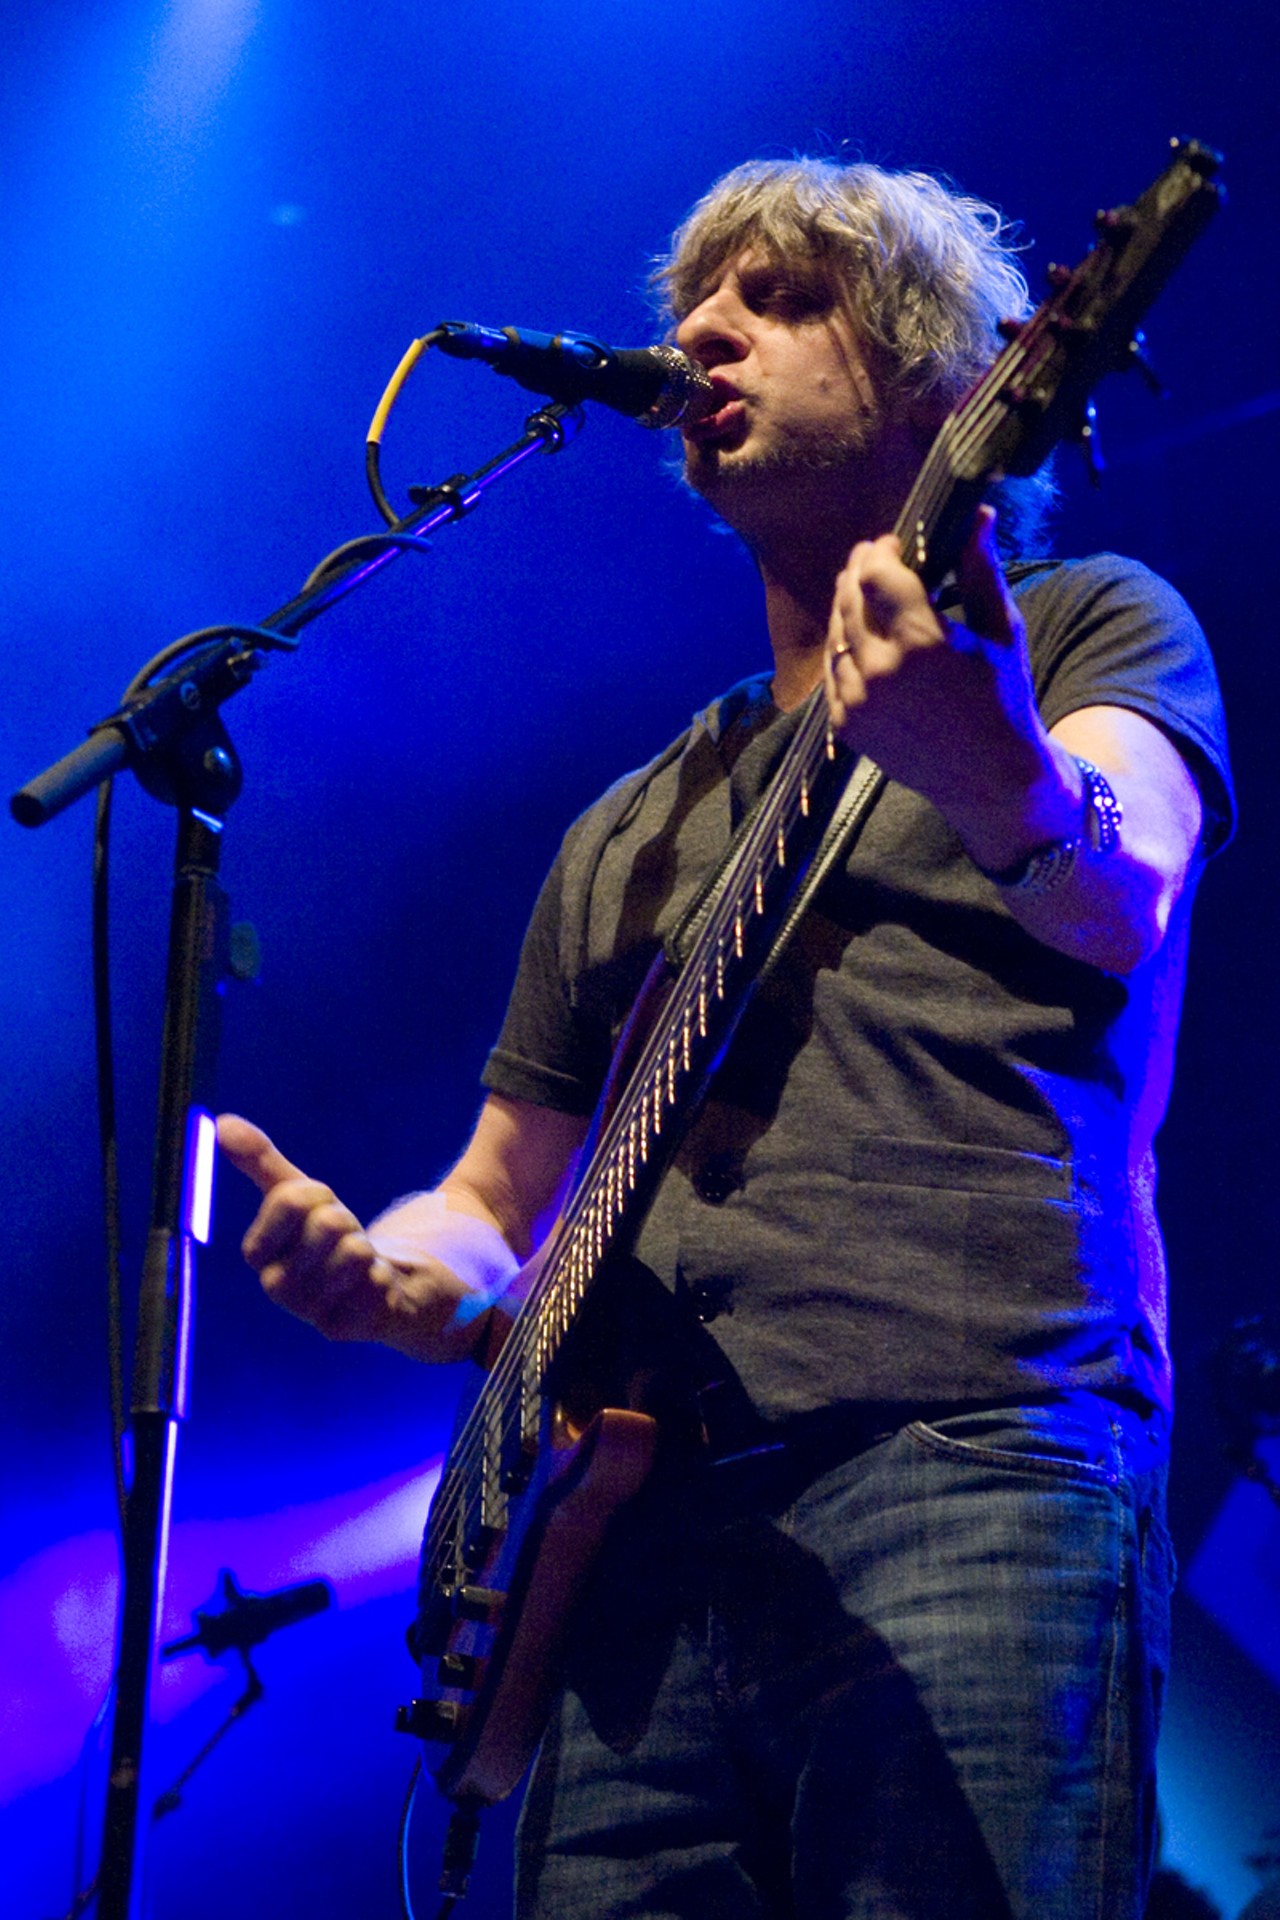 Mike Gordon performing at the Pageant.